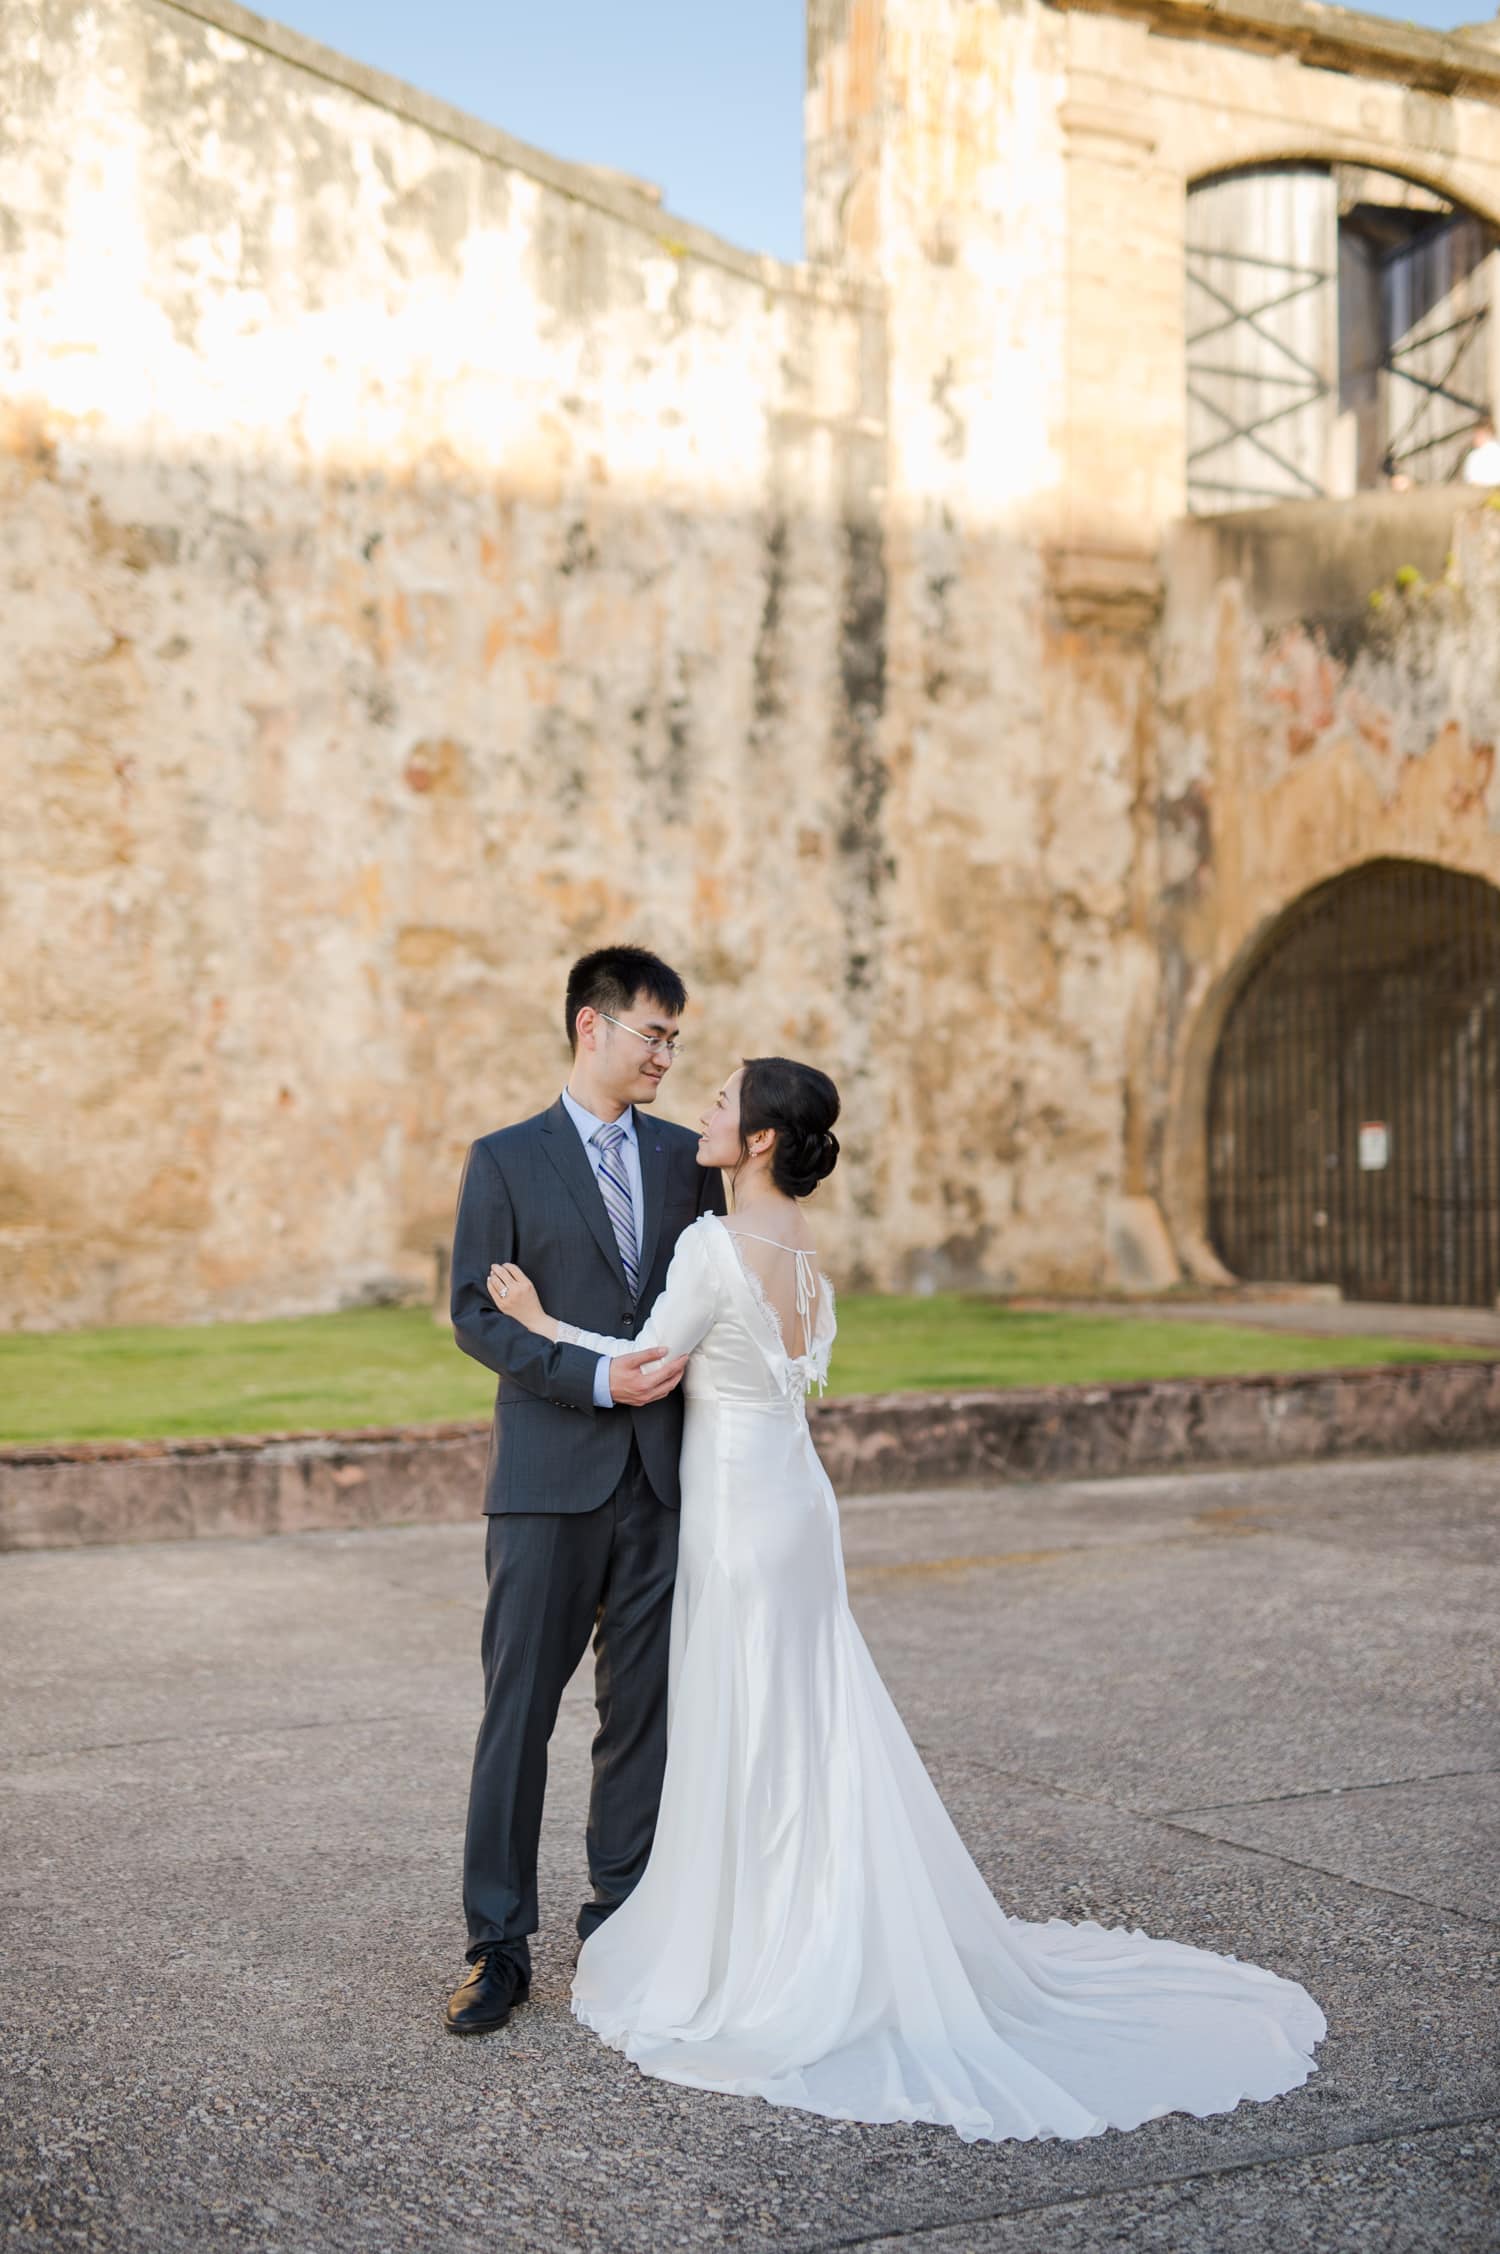 Old San Juan Puerto Rico wedding photography by Camille Fontanez